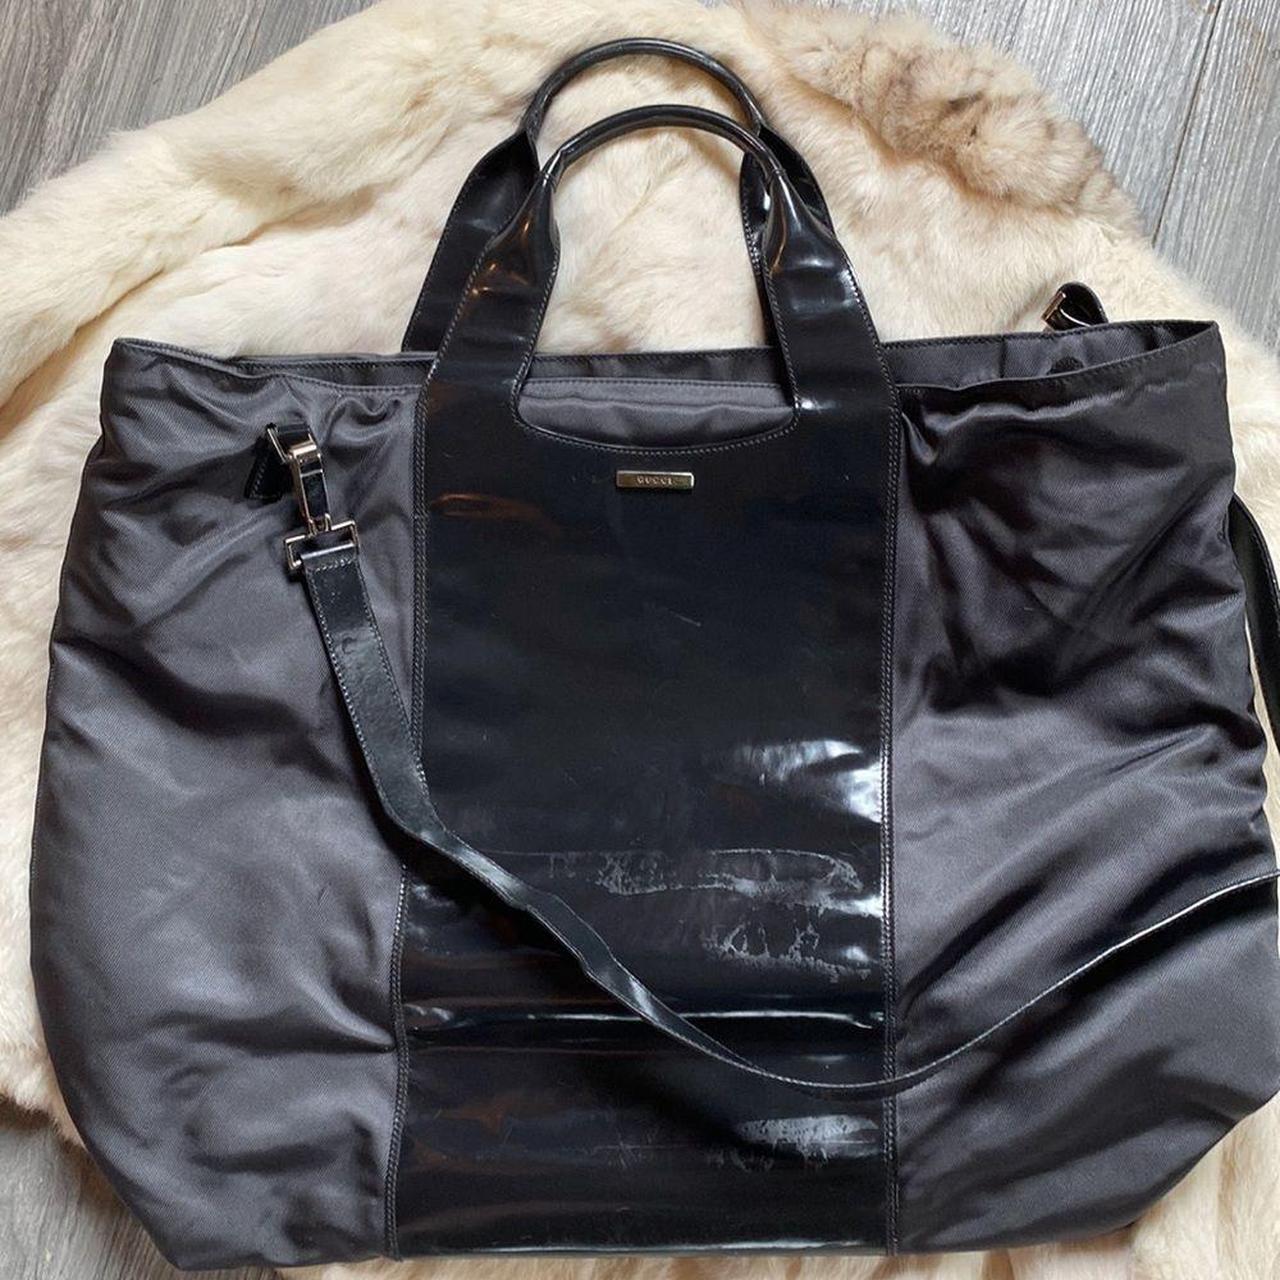 Gucci Women's Grey and Black Bag